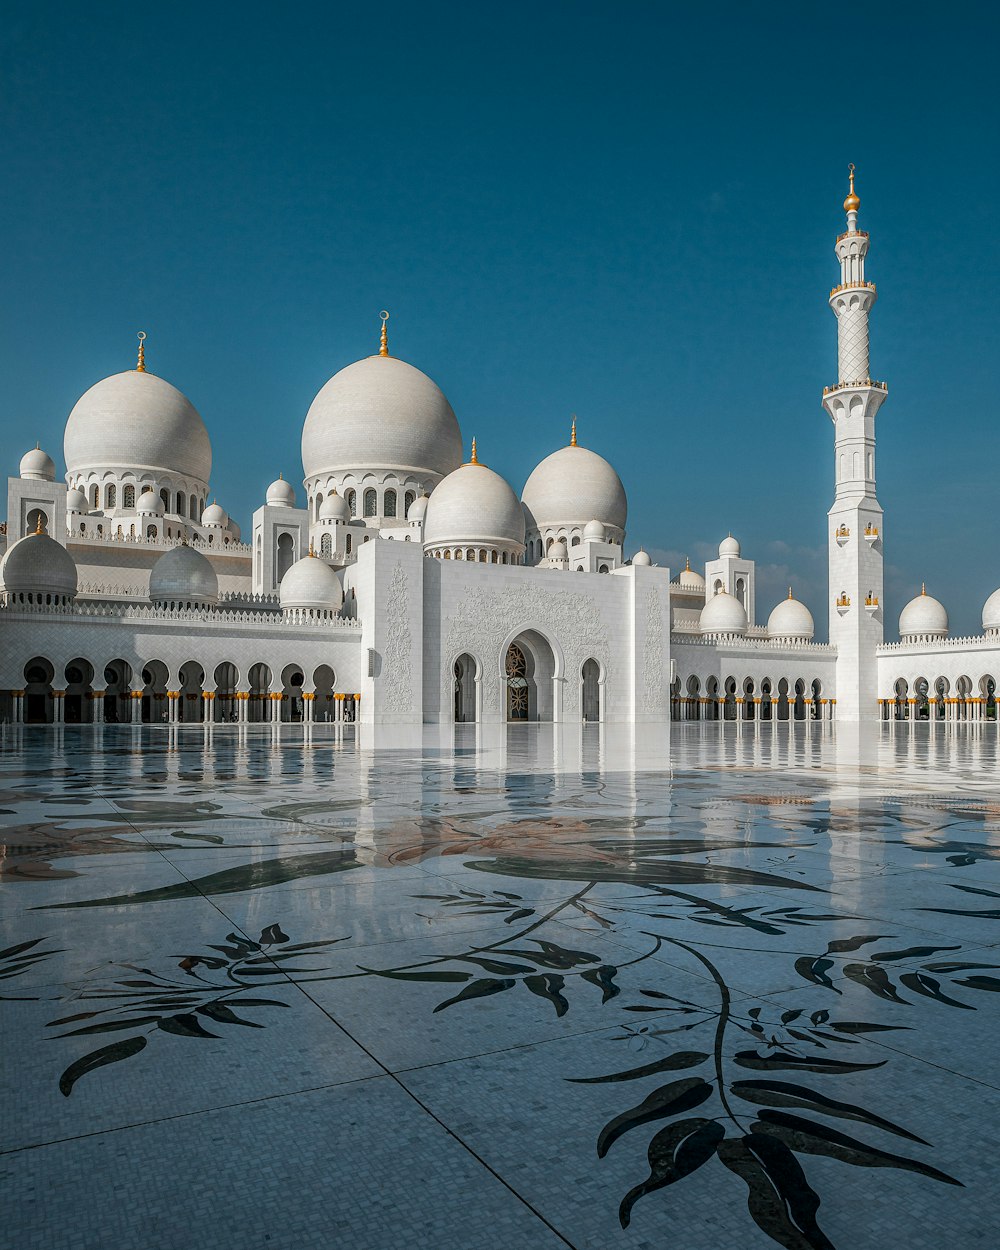 a large white building with domed roofs with Sheikh Zayed Mosque in the background